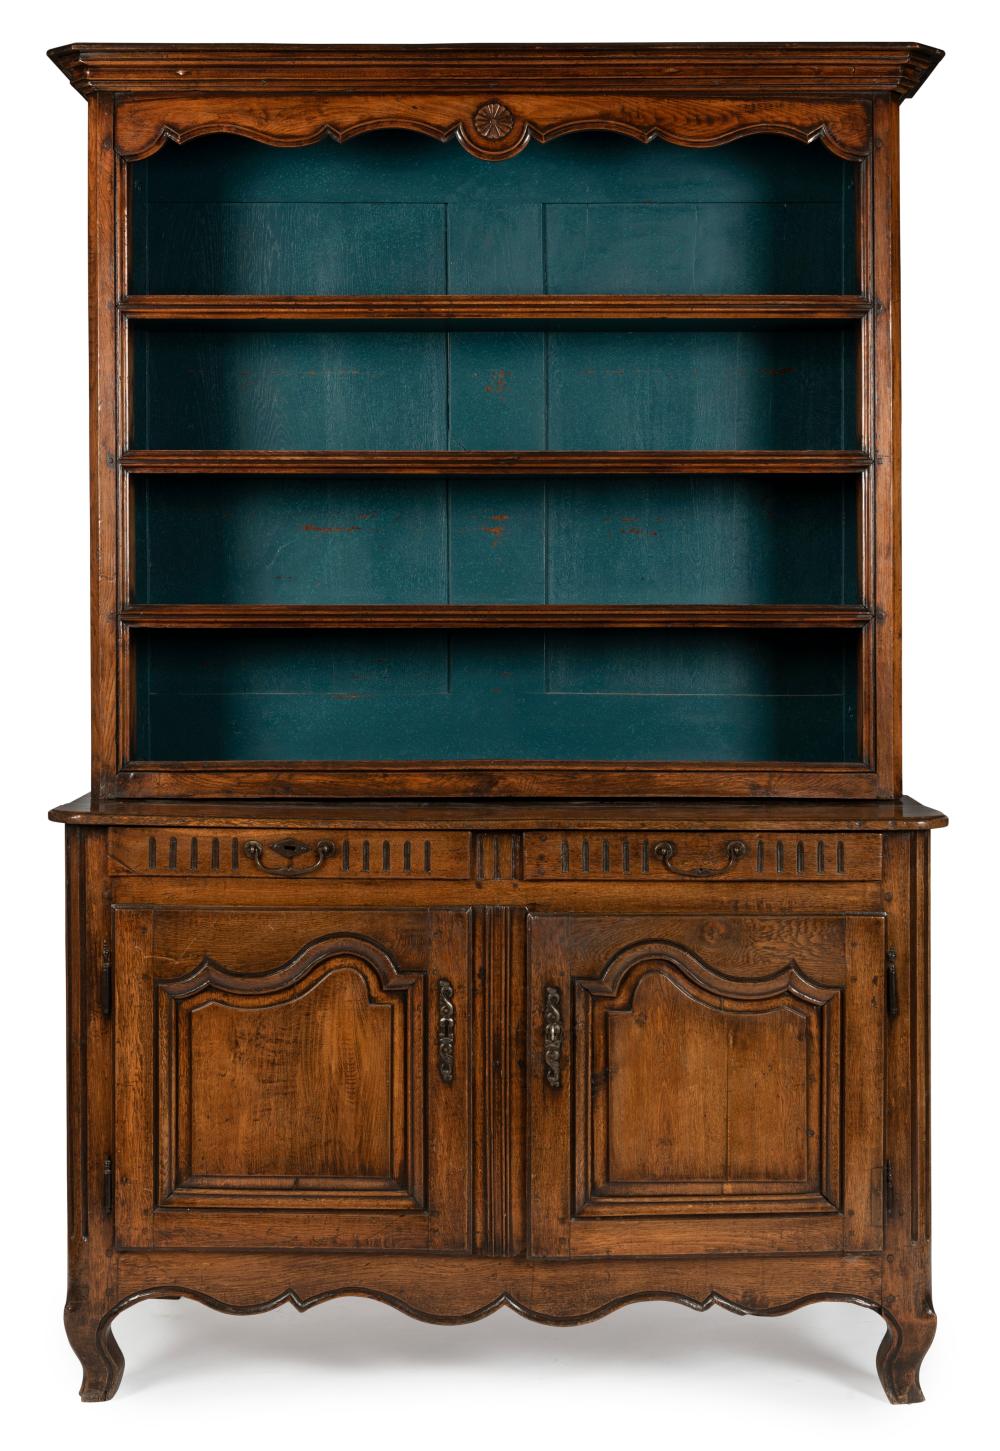 A Provincial Fruitwood Dresser, French, 19th Century